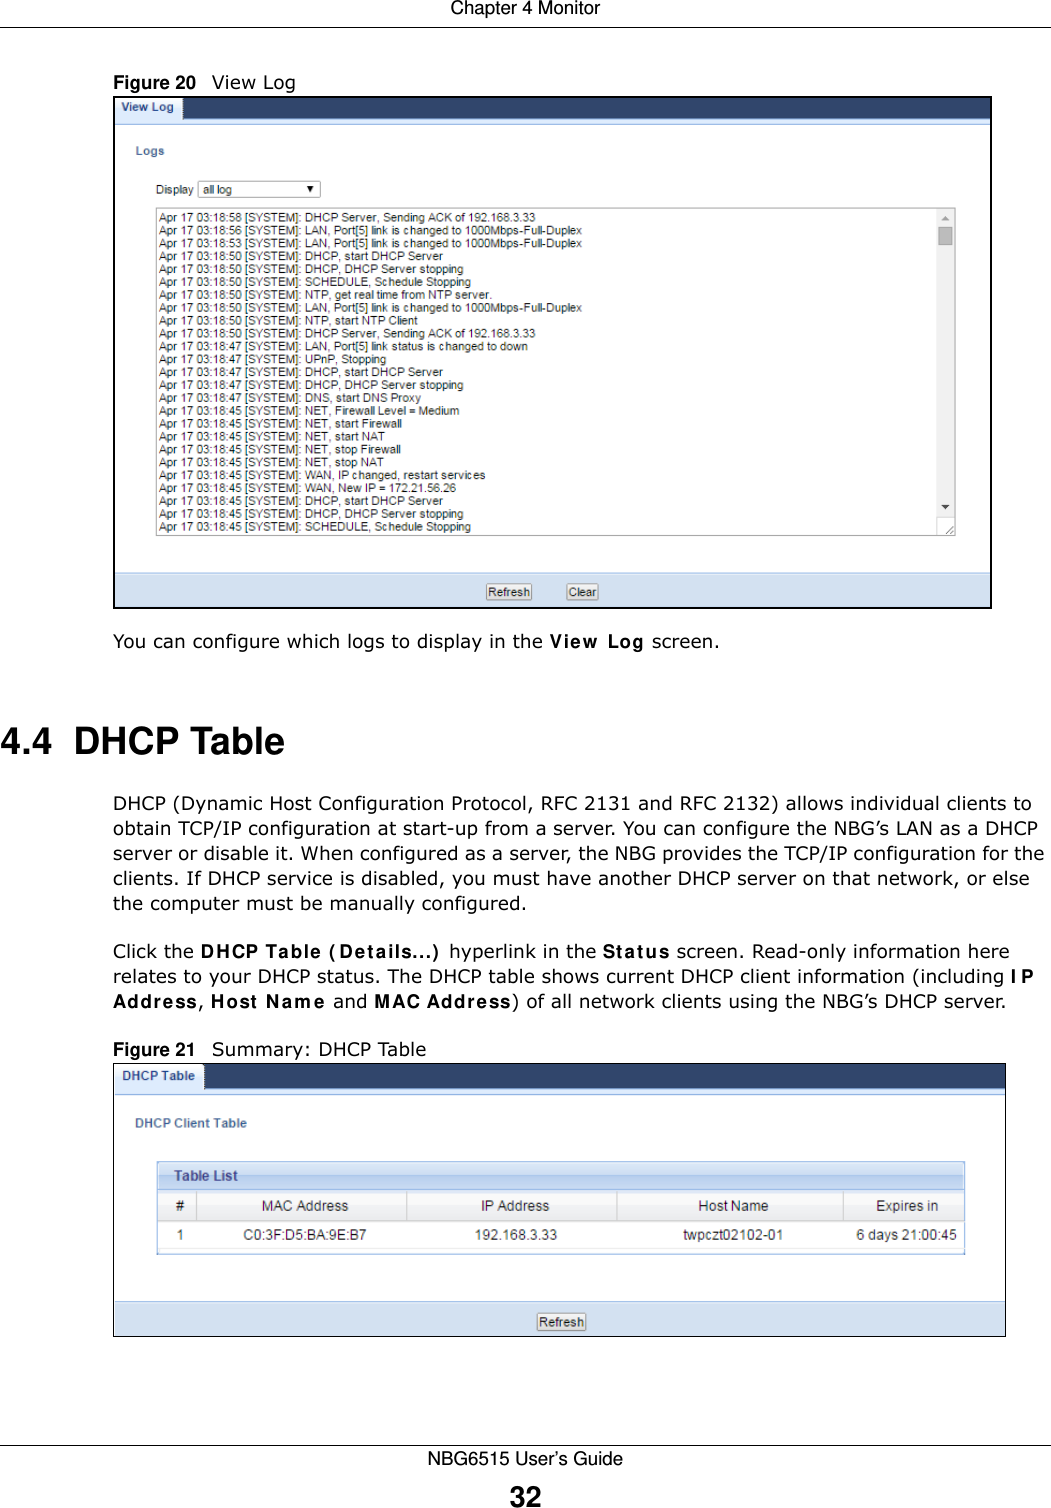 Chapter 4 MonitorNBG6515 User’s Guide32Figure 20   View LogYou can configure which logs to display in the View Log screen. 4.4  DHCP Table    DHCP (Dynamic Host Configuration Protocol, RFC 2131 and RFC 2132) allows individual clients to obtain TCP/IP configuration at start-up from a server. You can configure the NBG’s LAN as a DHCP server or disable it. When configured as a server, the NBG provides the TCP/IP configuration for the clients. If DHCP service is disabled, you must have another DHCP server on that network, or else the computer must be manually configured.Click the DHCP Table (Details...) hyperlink in the Status screen. Read-only information here relates to your DHCP status. The DHCP table shows current DHCP client information (including IP Address, Host Name and MAC Address) of all network clients using the NBG’s DHCP server.Figure 21   Summary: DHCP Table